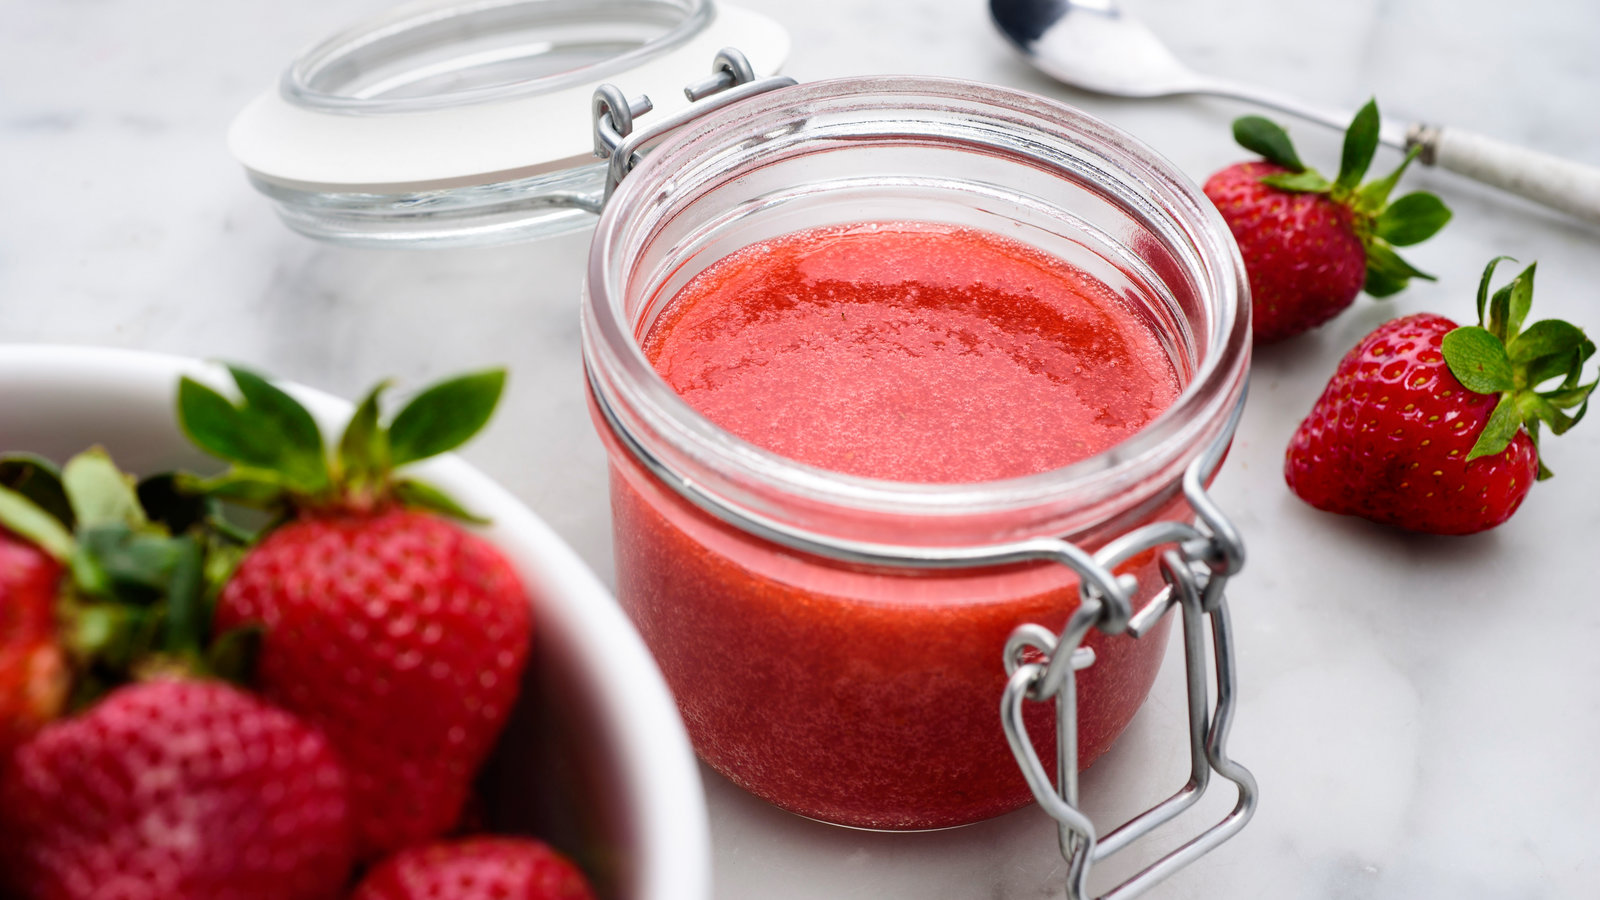 Strawberry Puree Market Size and Share with Industry Analysis Report till 2025